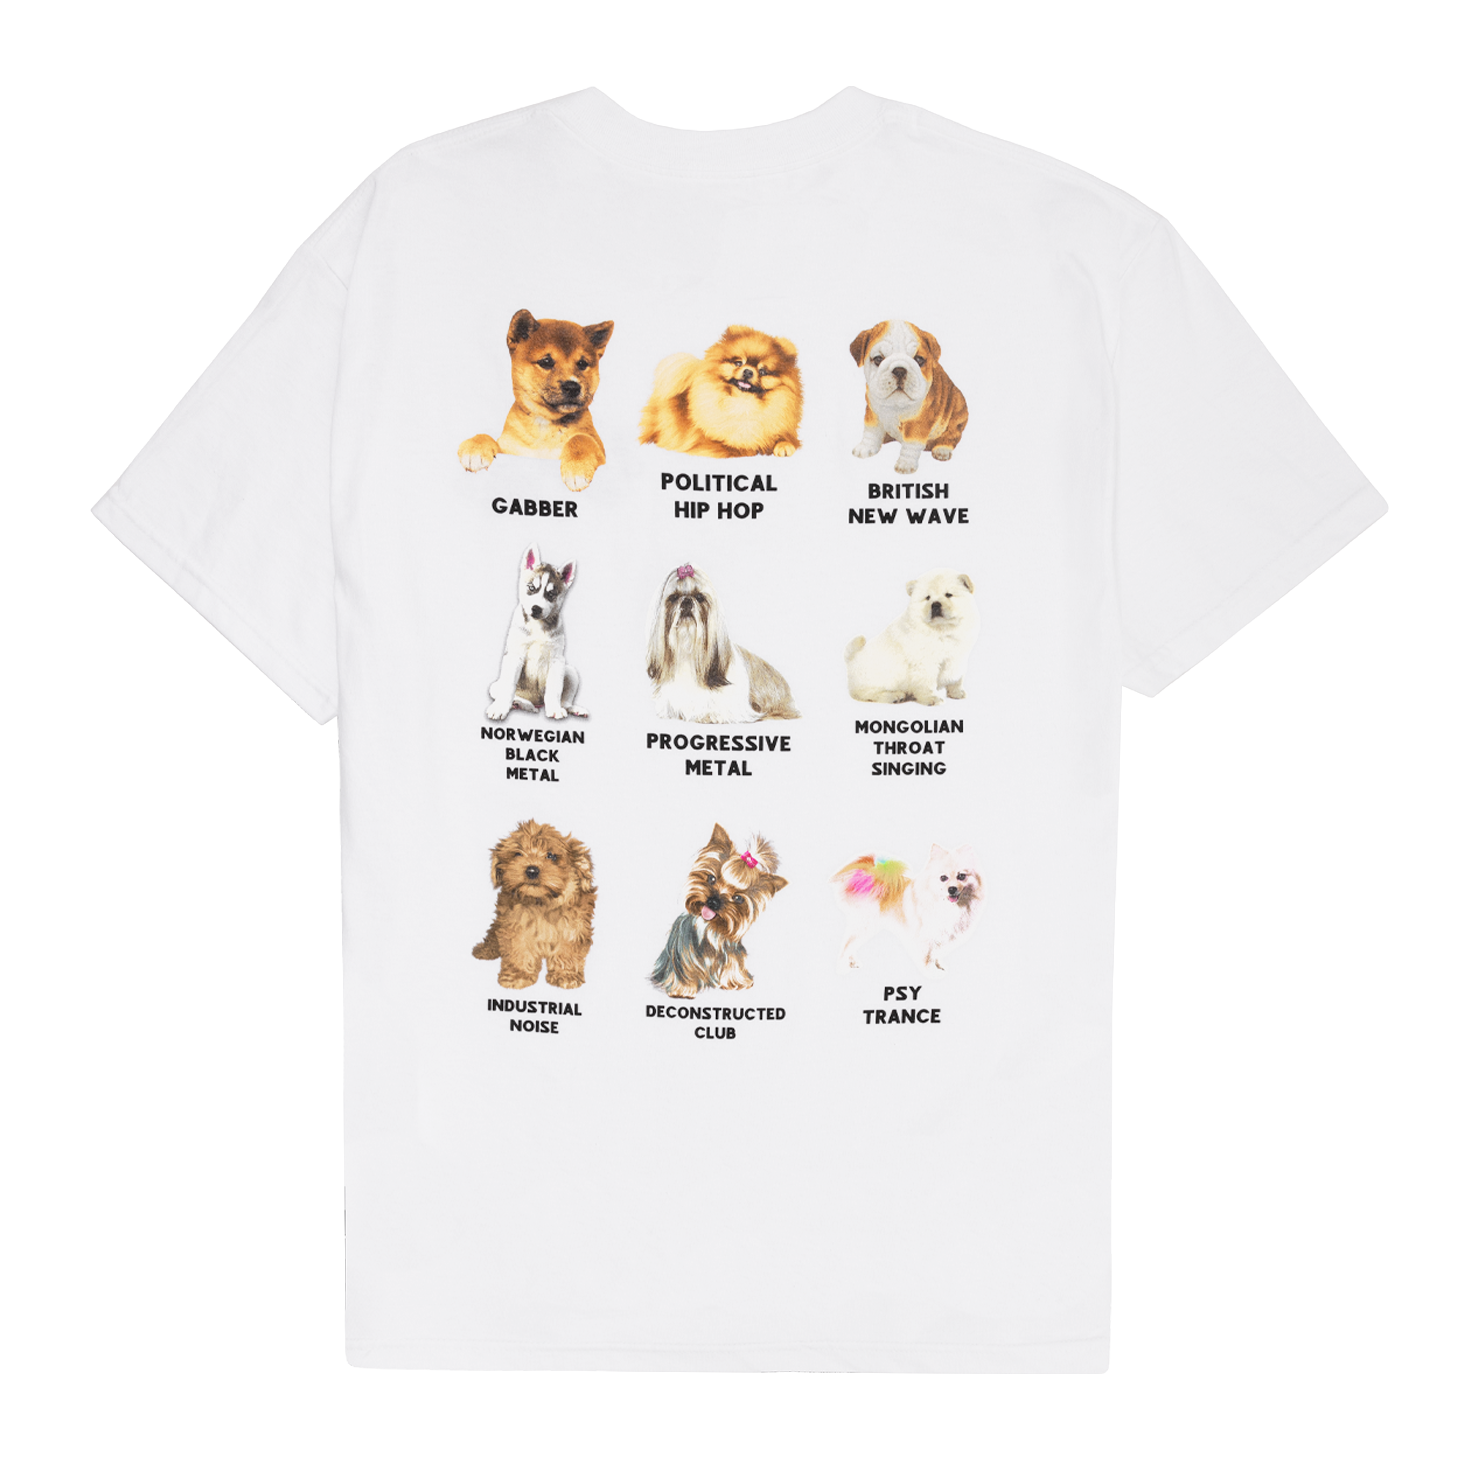 Puppies Tee - Whiite